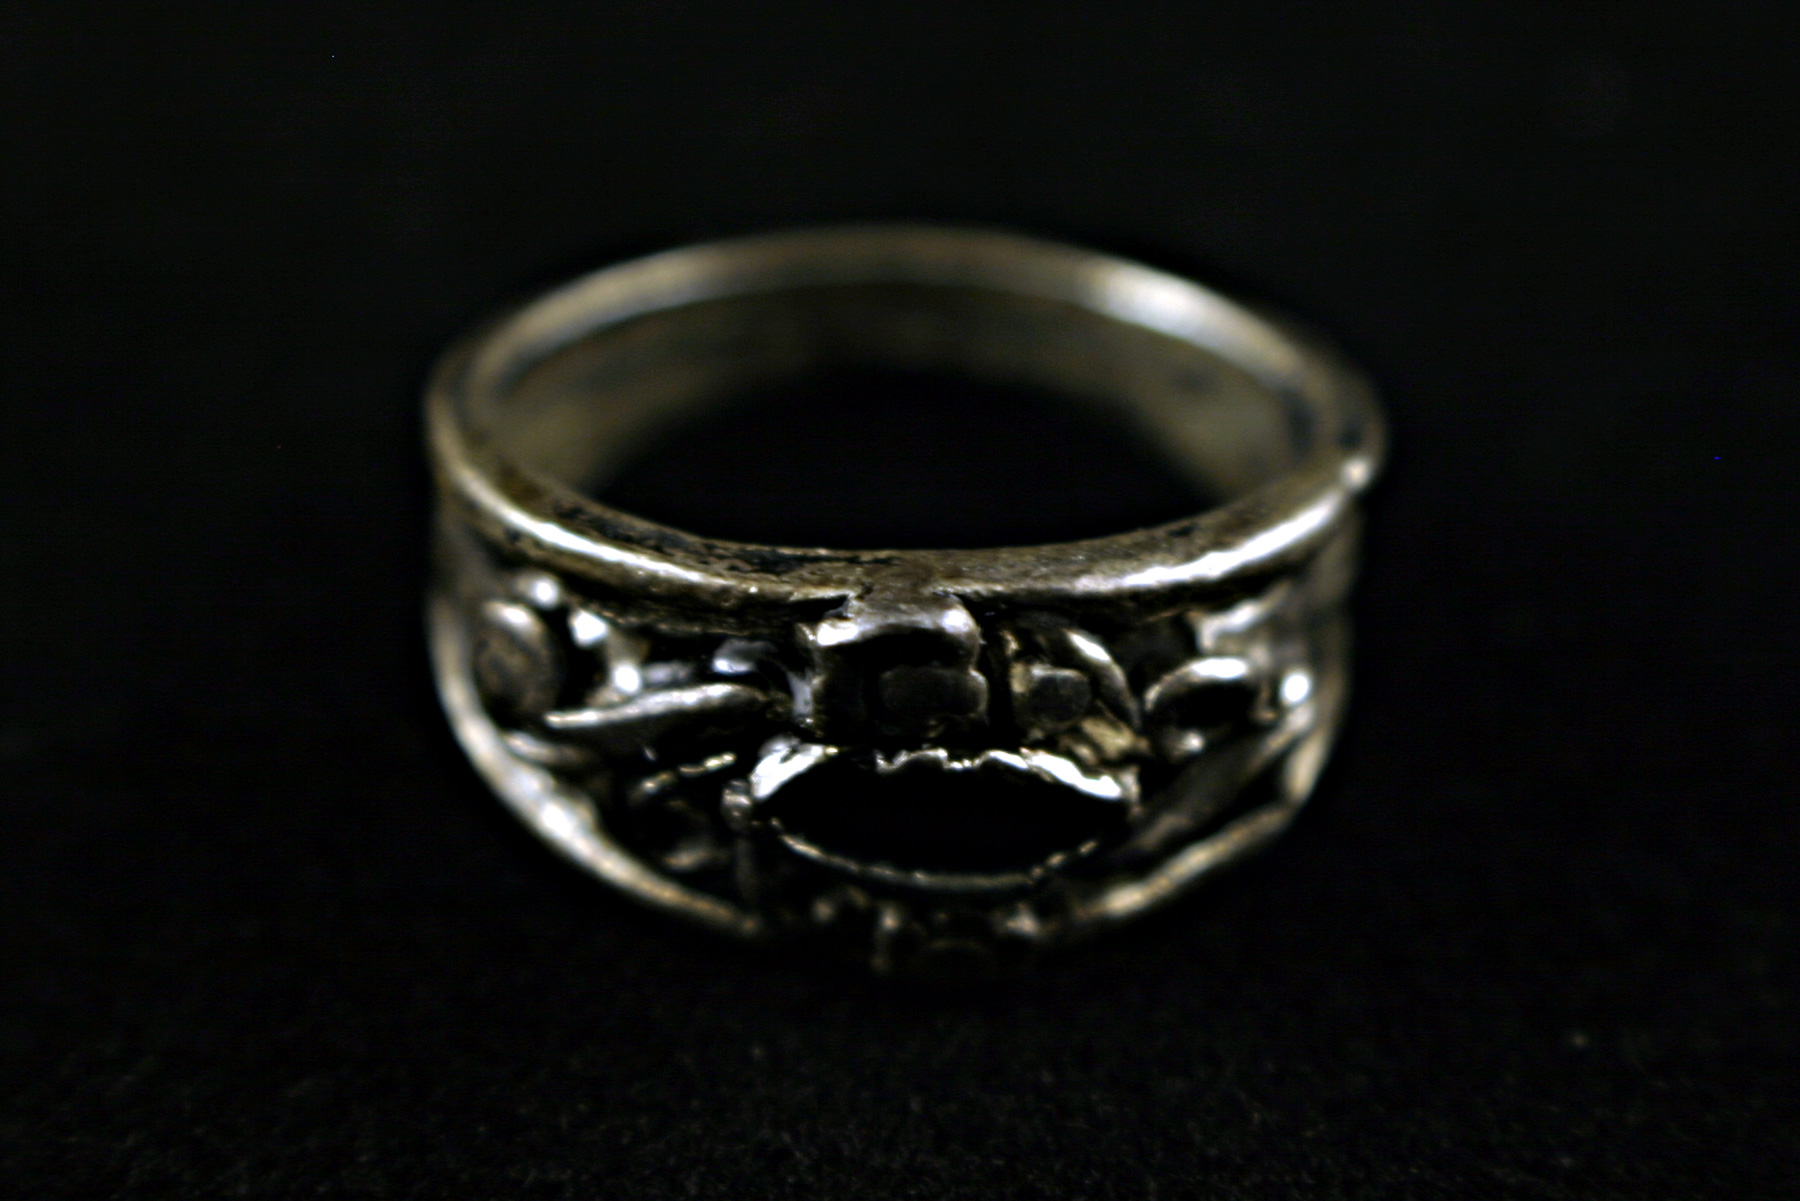 Siver ring photo